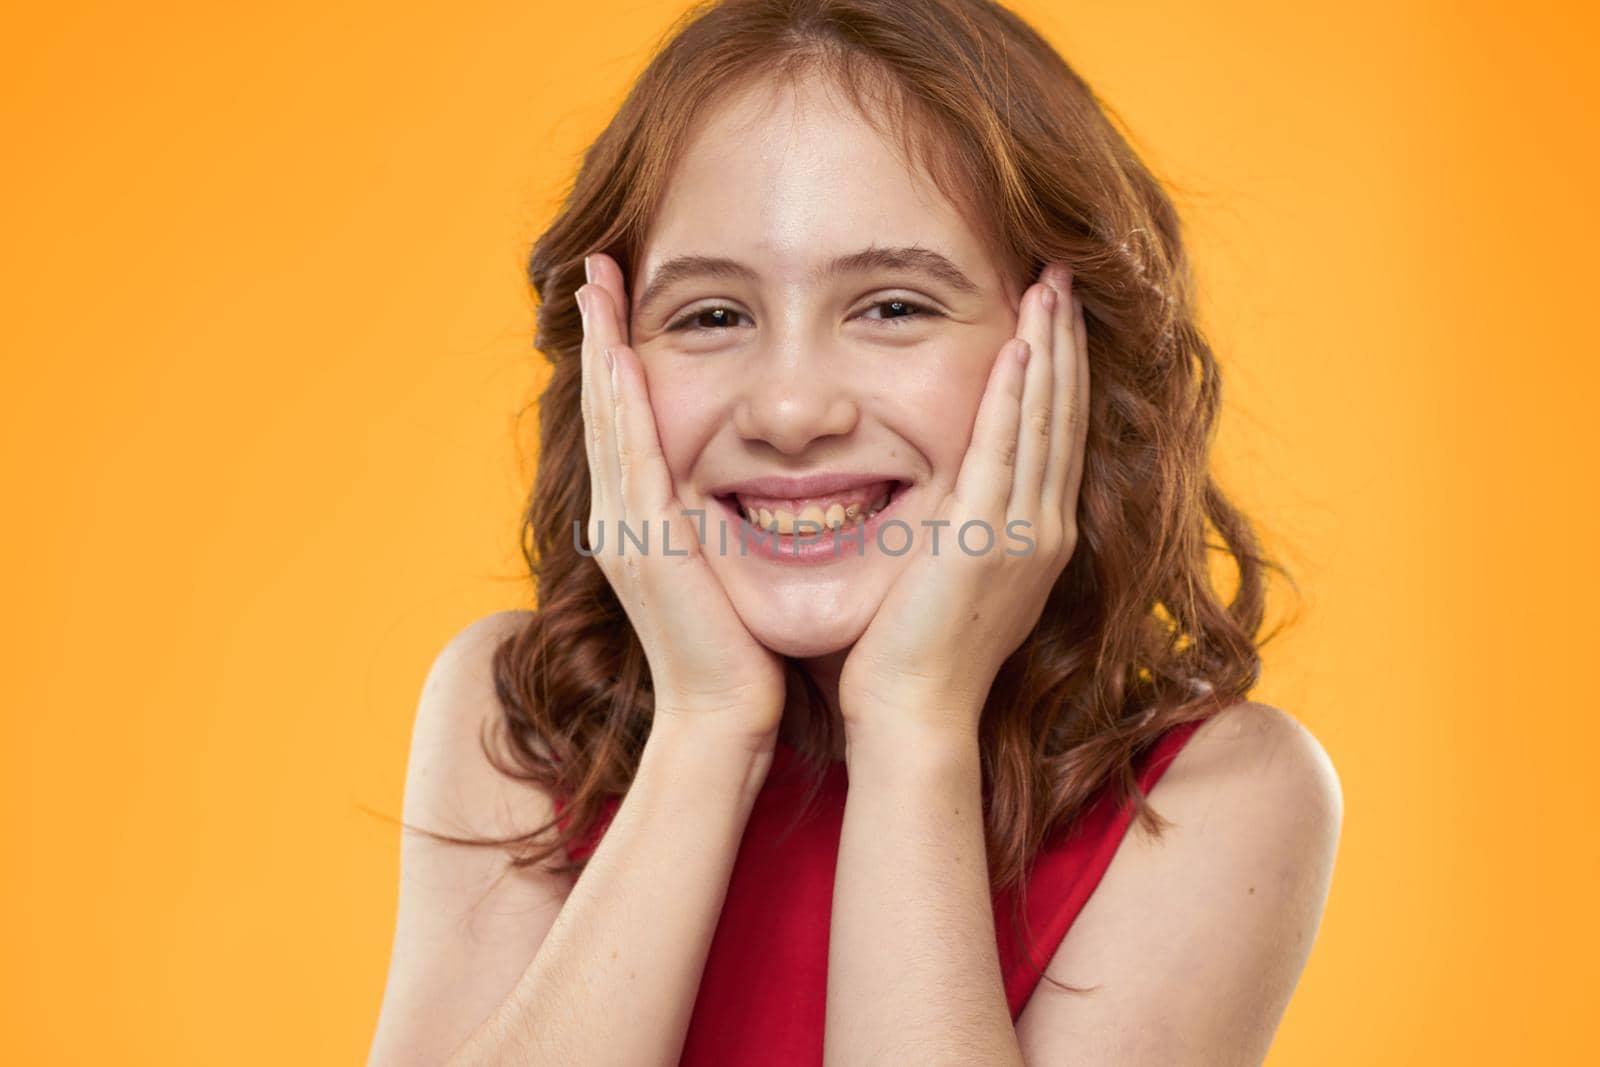 Girl with curly hair red dress fun childhood emotions yellow background. High quality photo